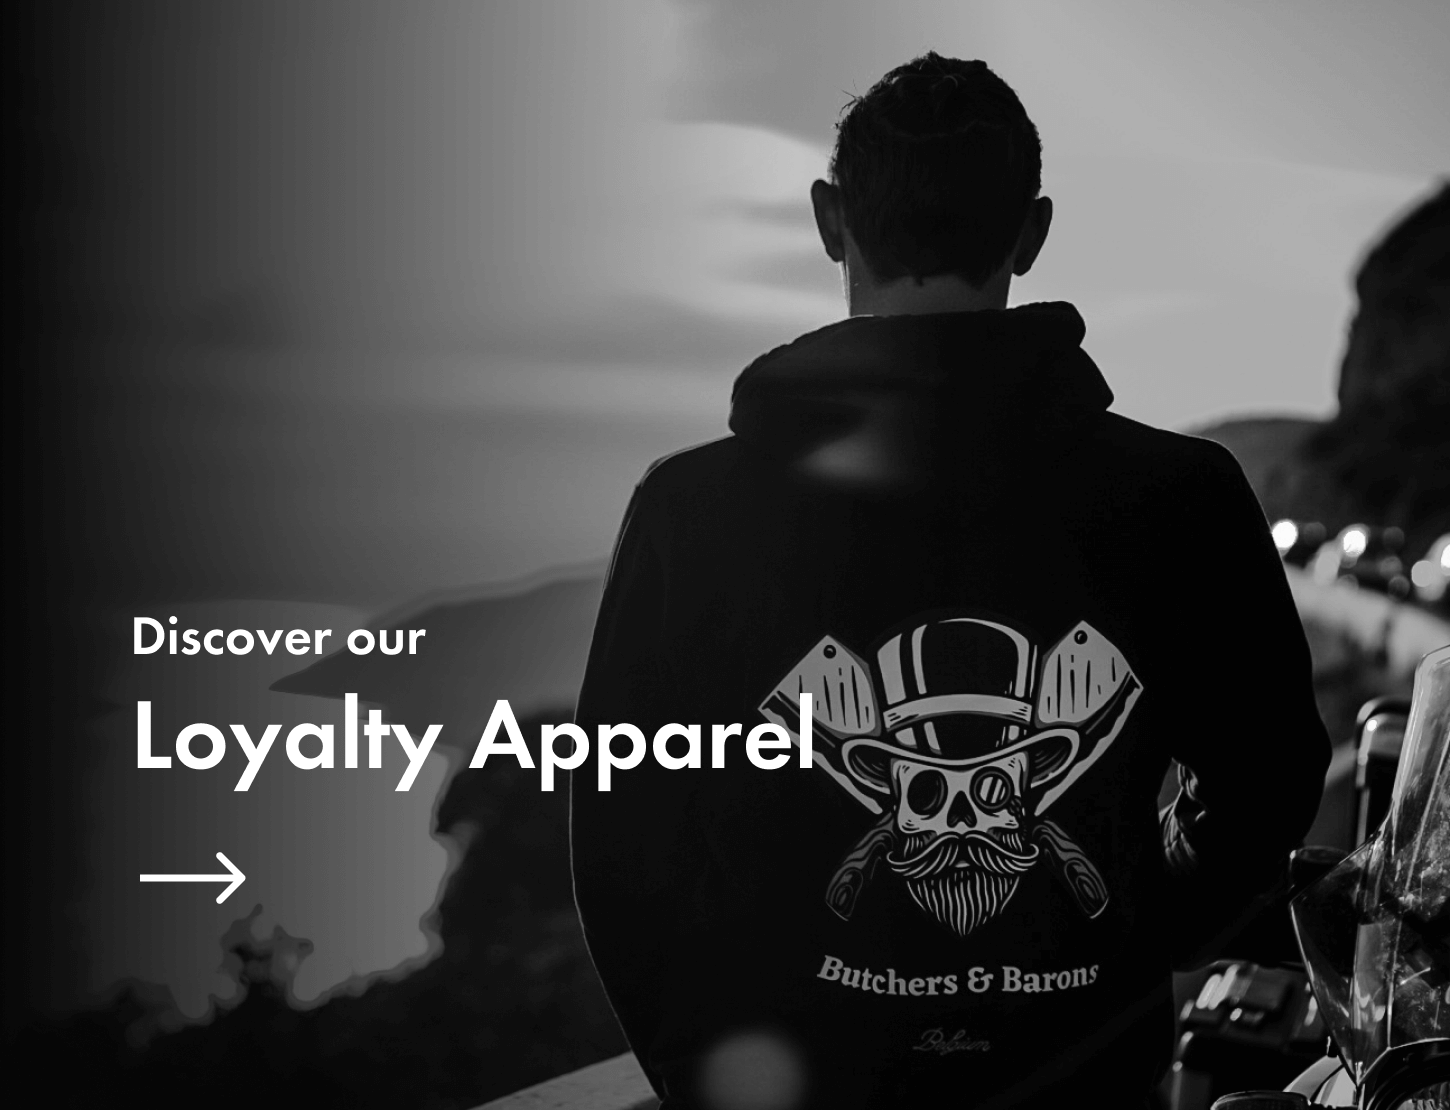 Discover our Loyalty Apparel